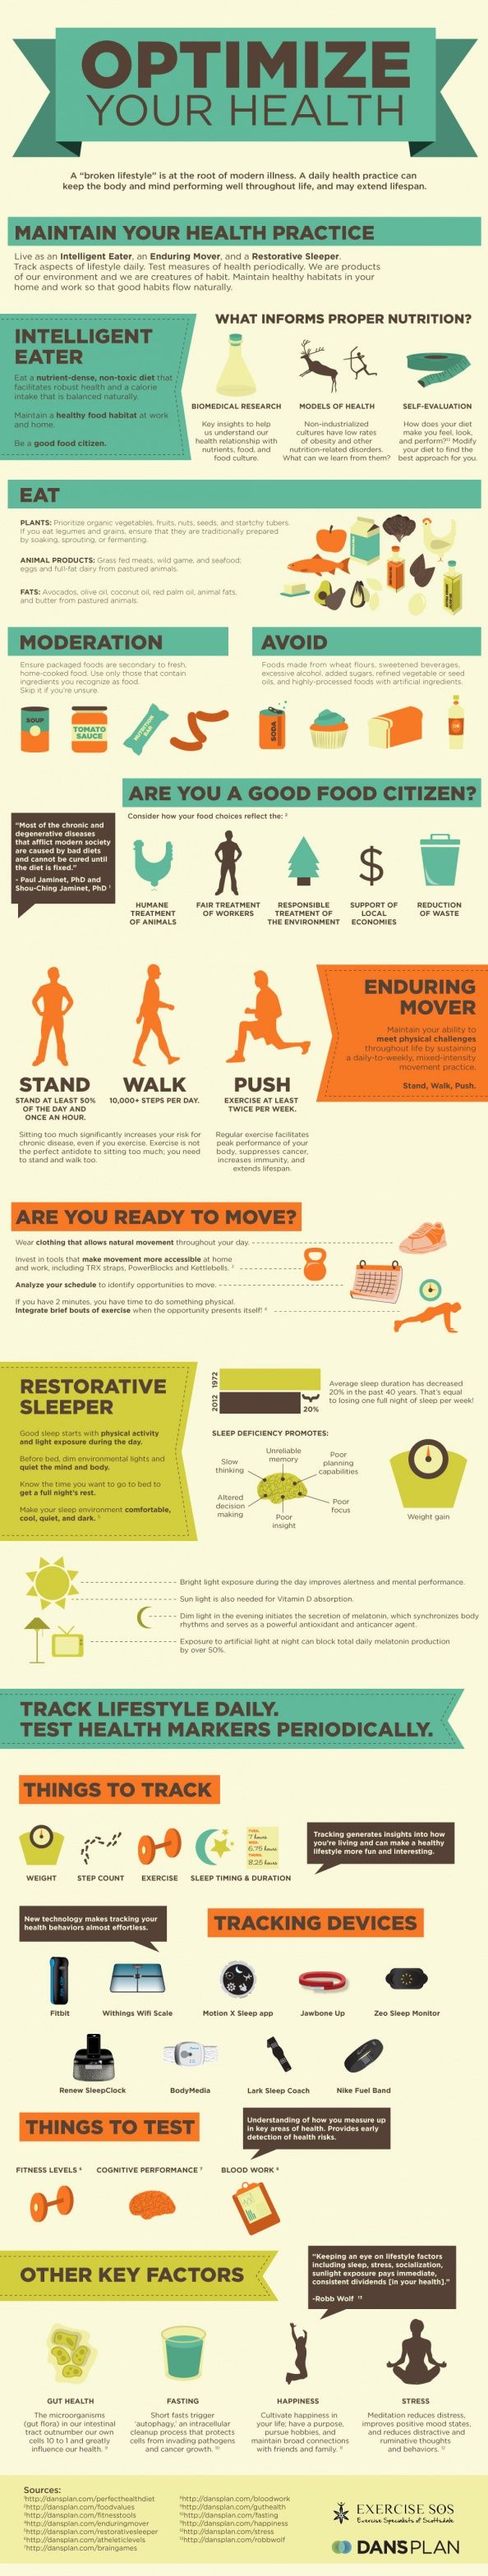 How to Optimize Your Health Infographic